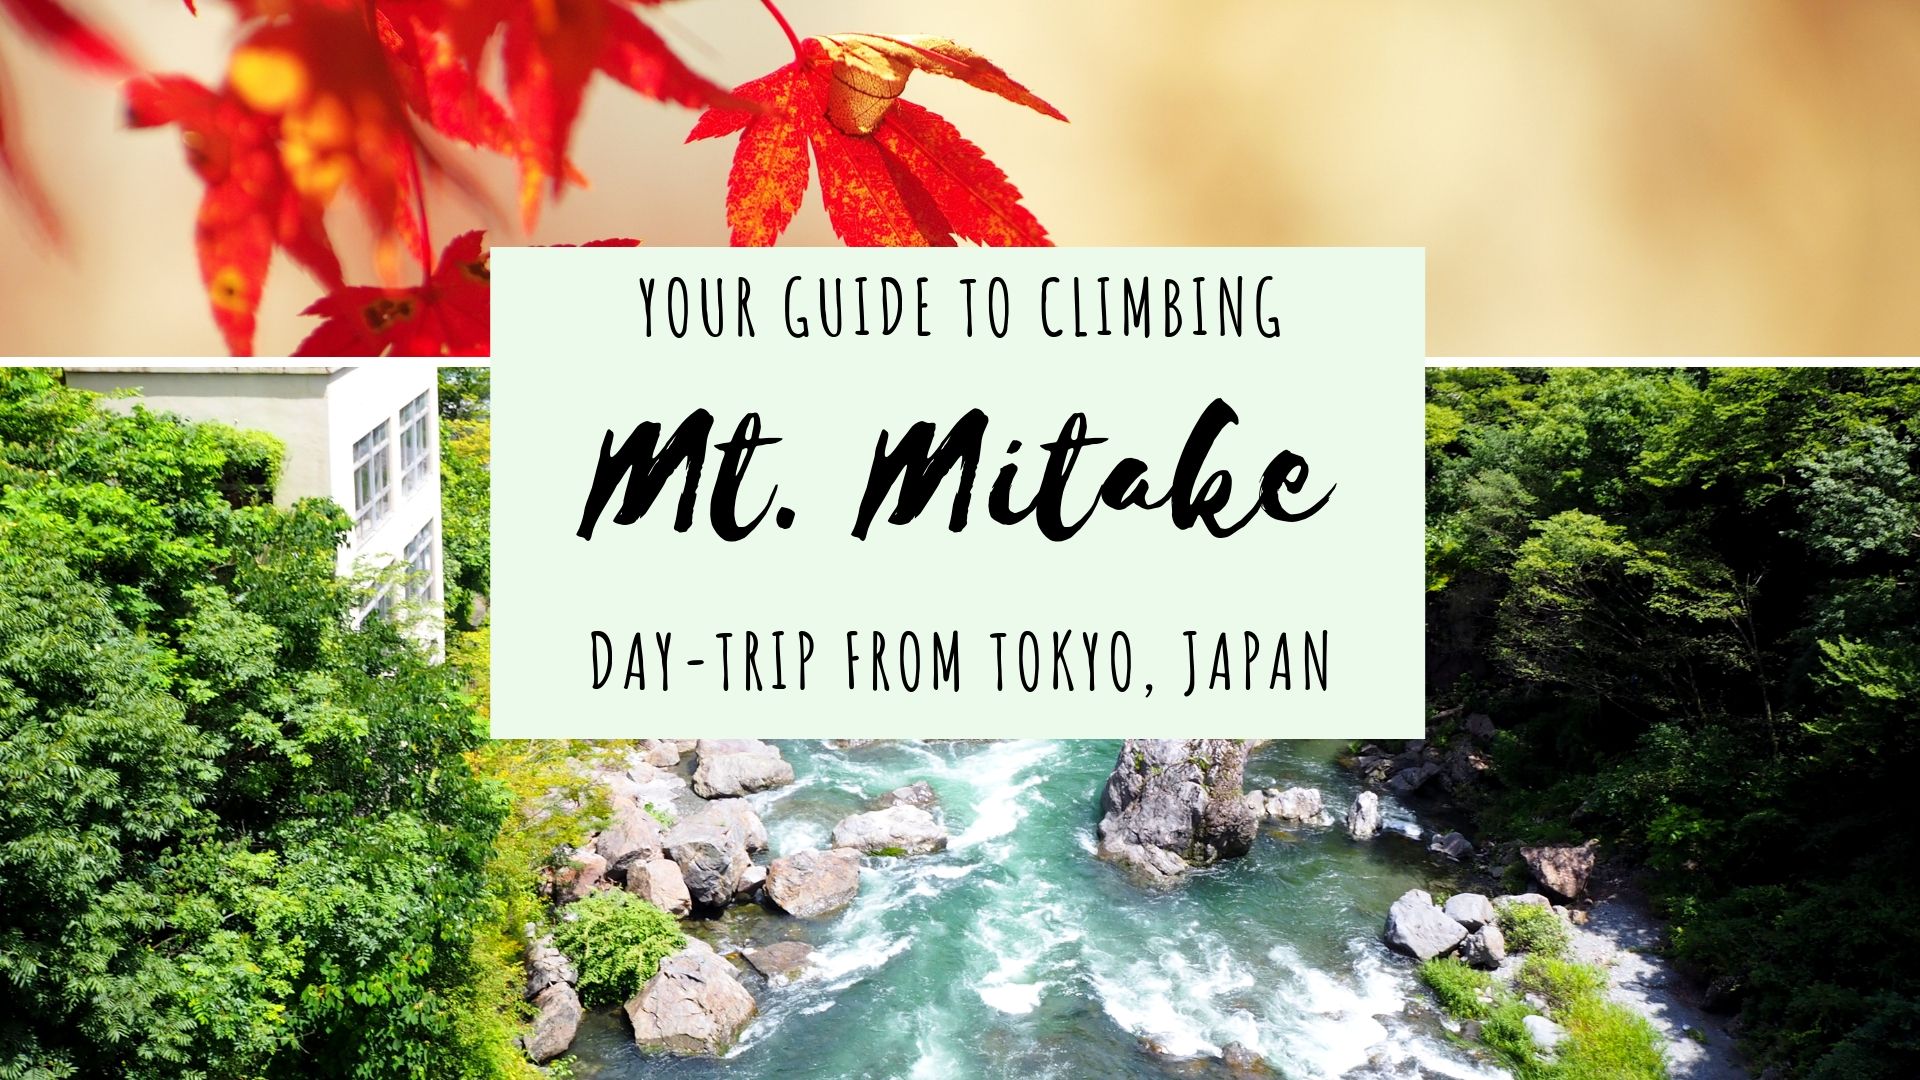 Climbing Mt. Mitake Day-trip from Tokyo. How to get to Mt. Mitake, how to climb, things to do at Mt. Mitake summit temple pinterest